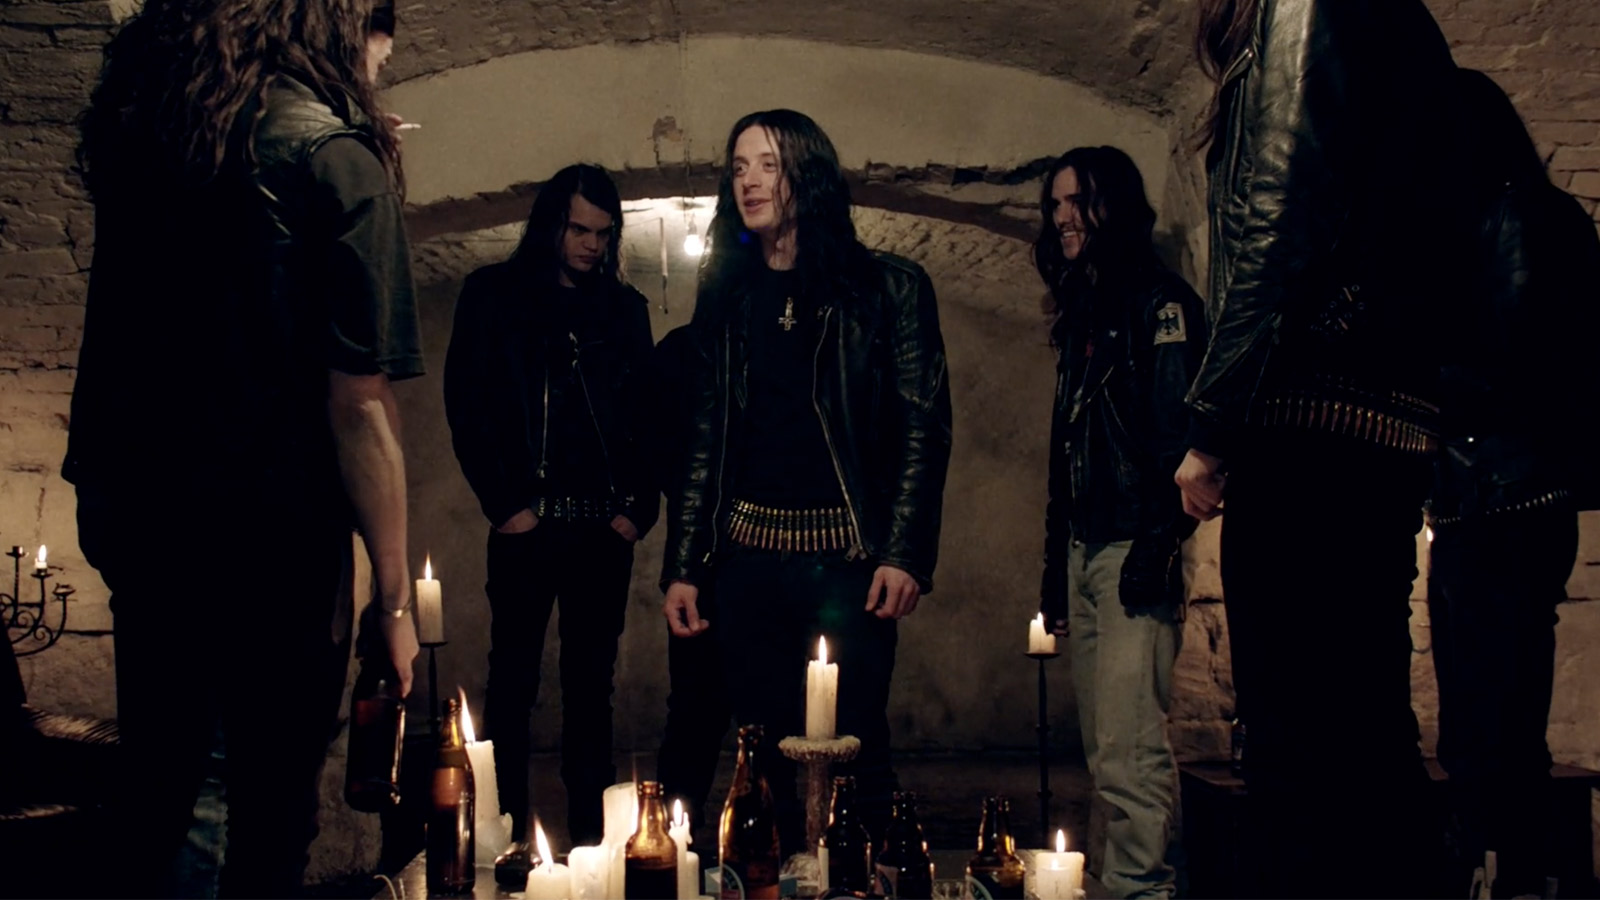 Lords of Chaos movie available On Demand today!